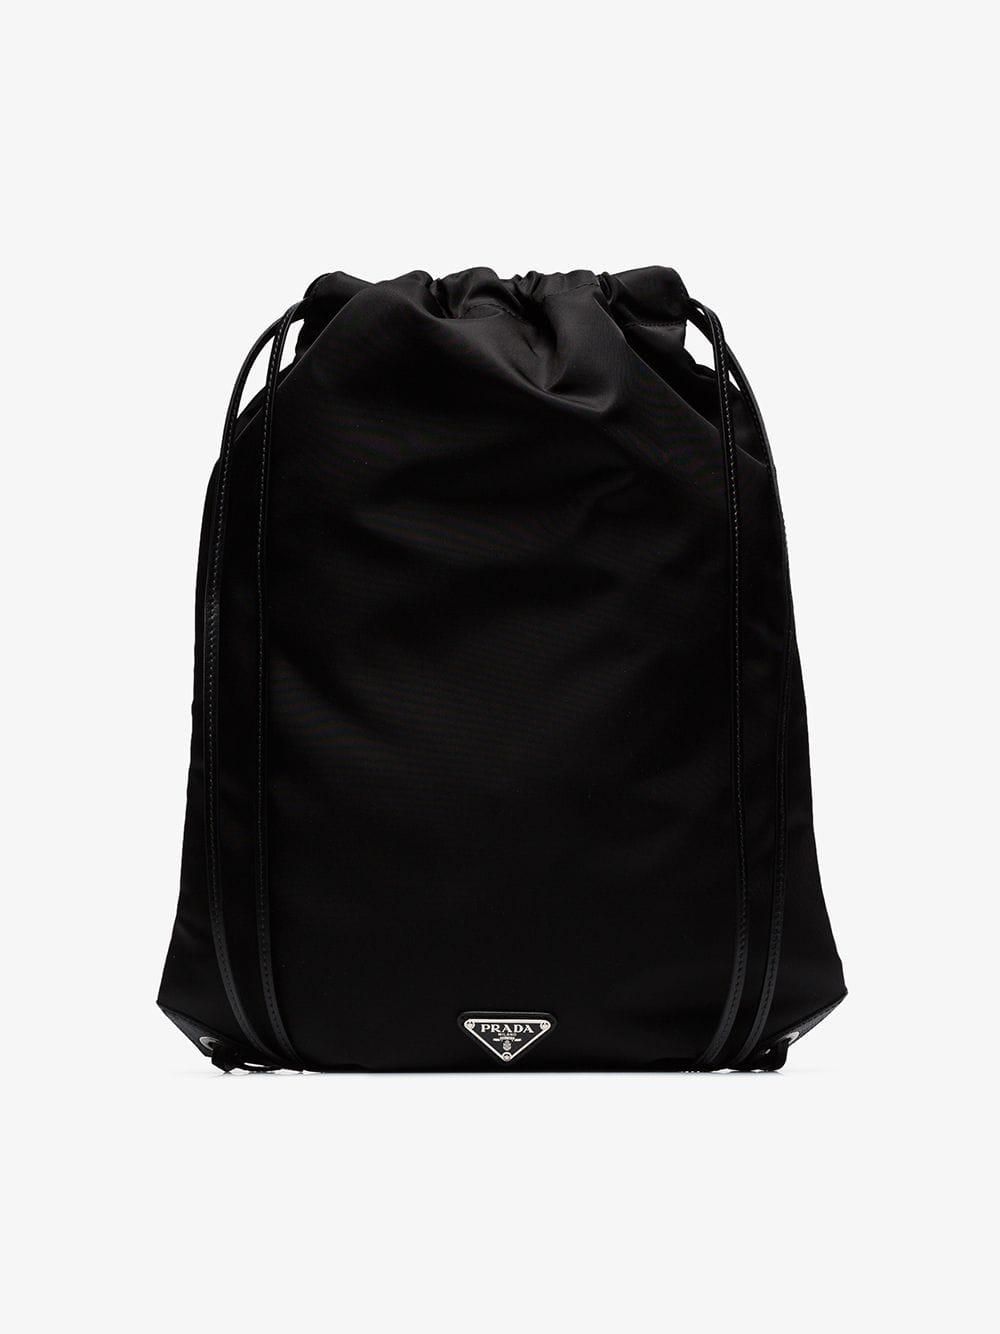  Prada Black Nylon and Leather Drawstring Pouch 1NA369 :  Clothing, Shoes & Jewelry